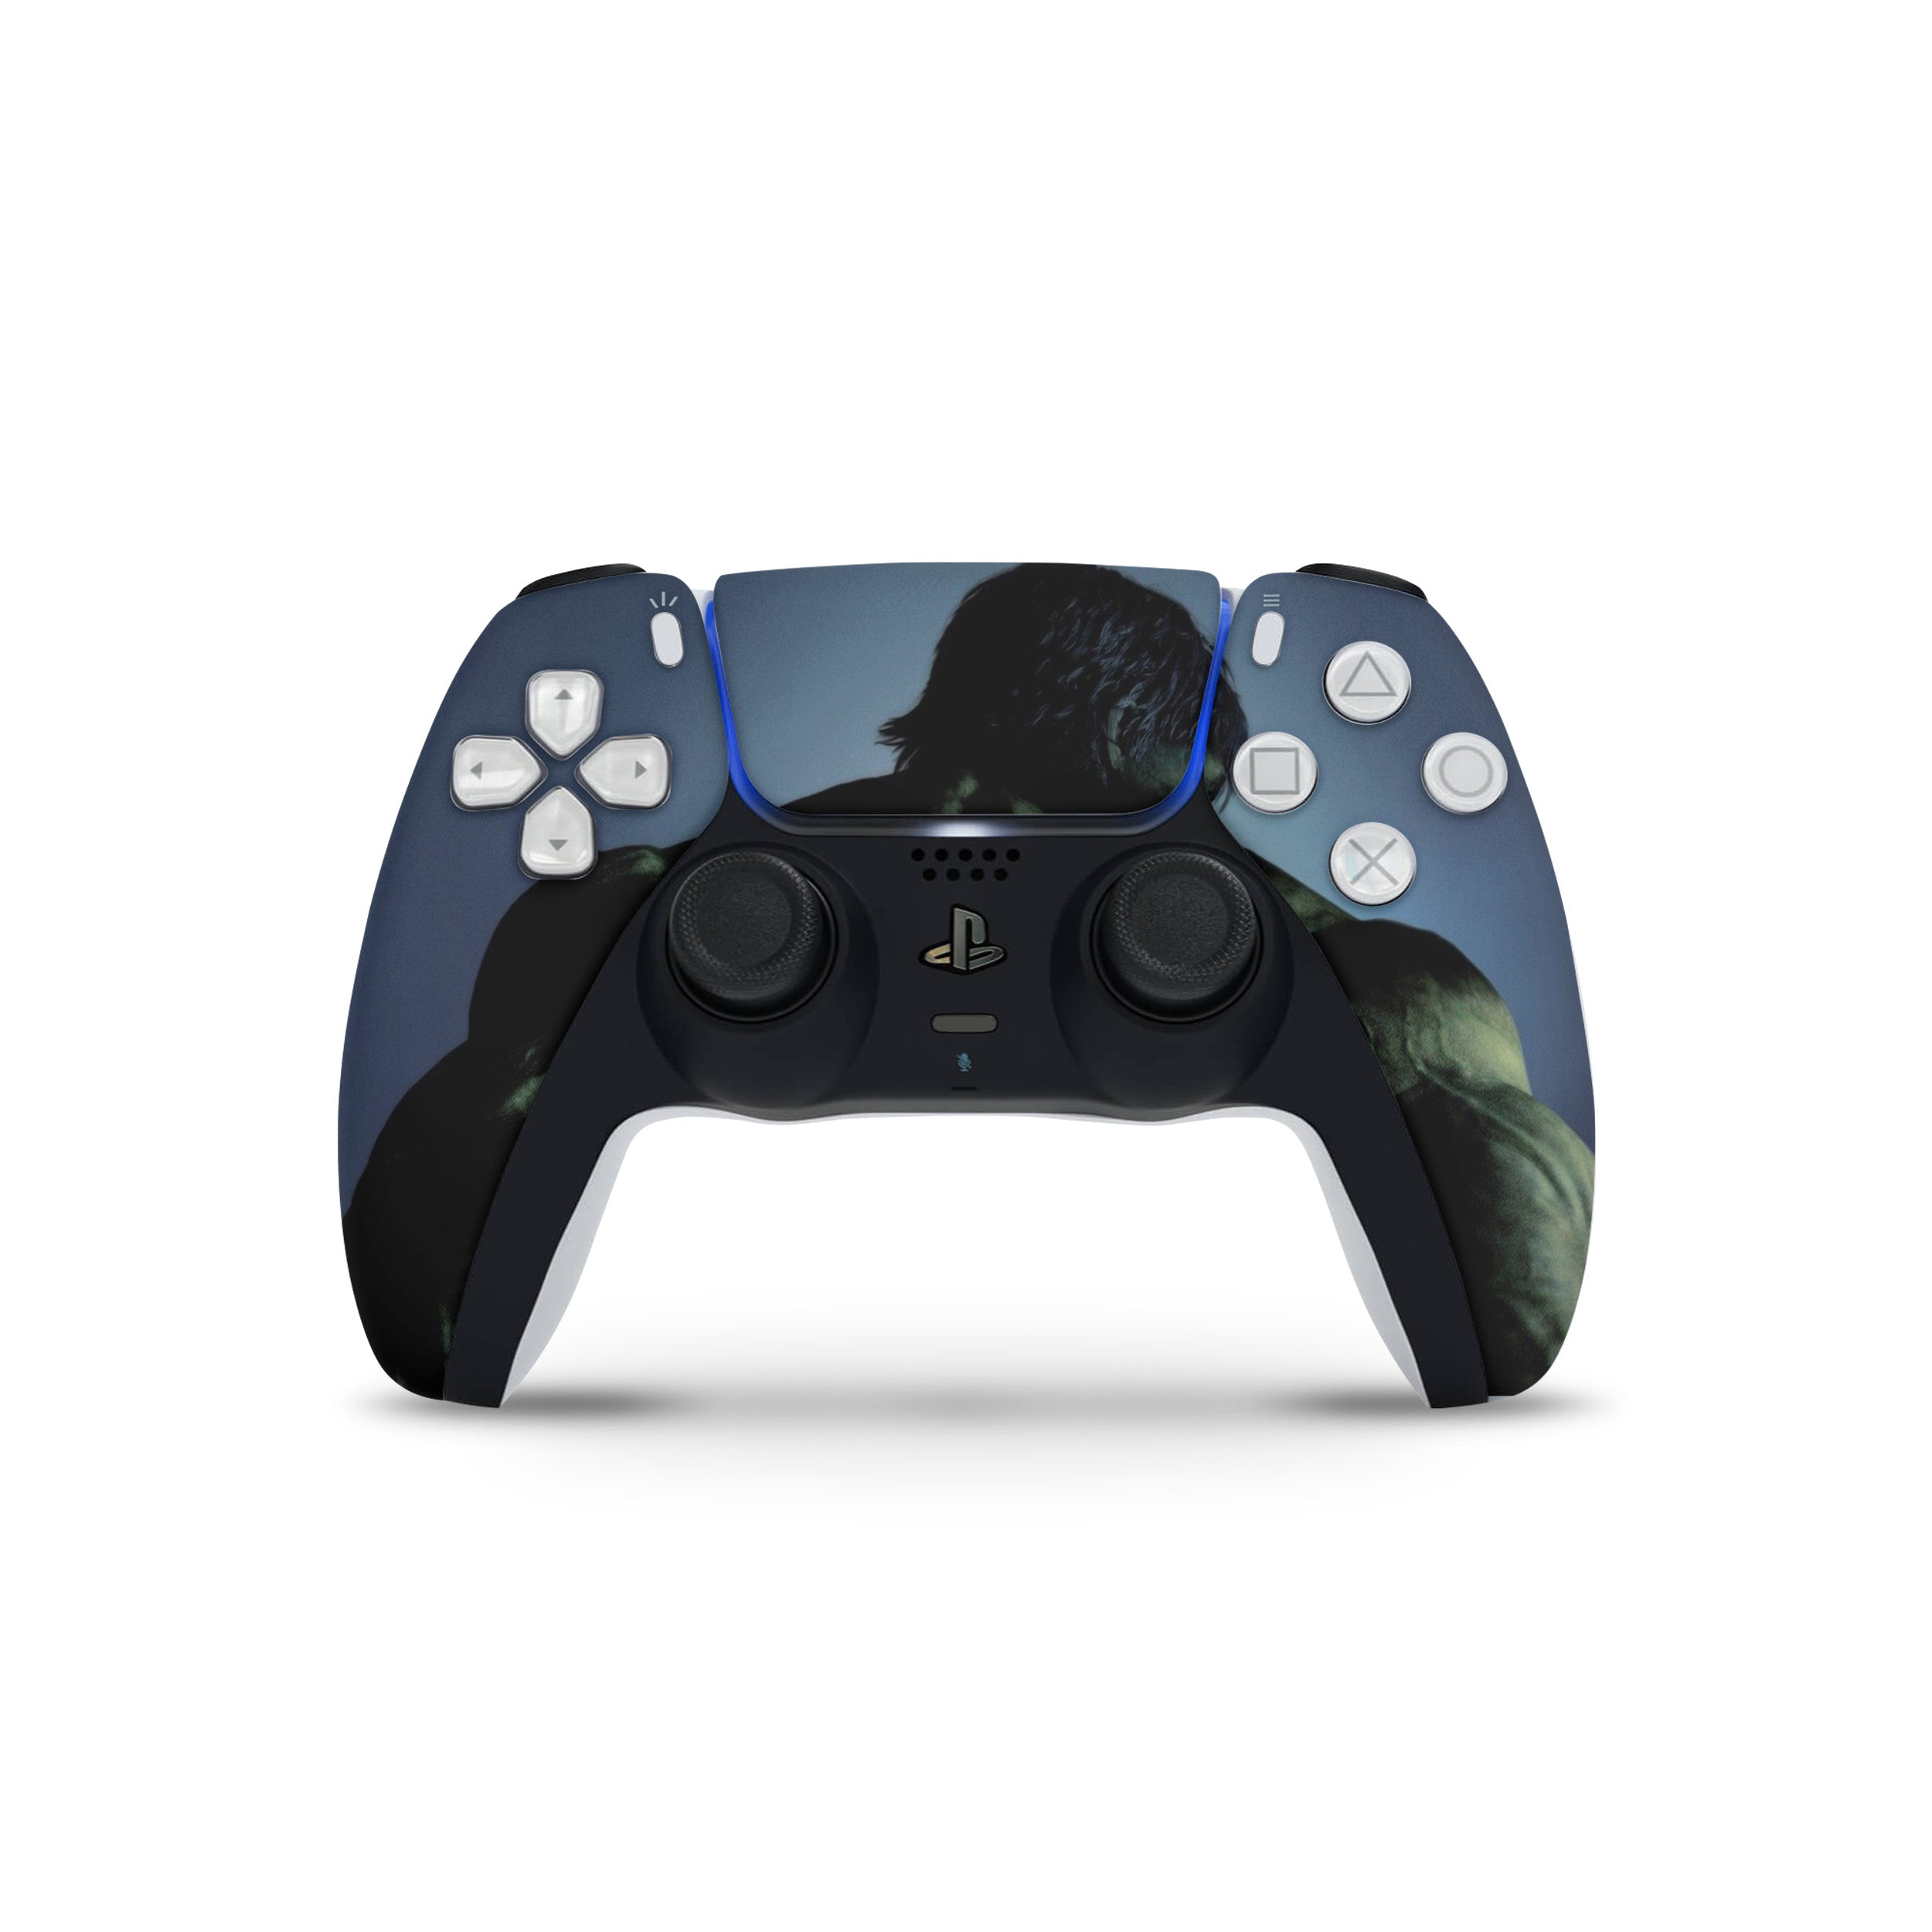 A video game skin featuring a Marvel Hulk design for the PS5 DualSense Controller.